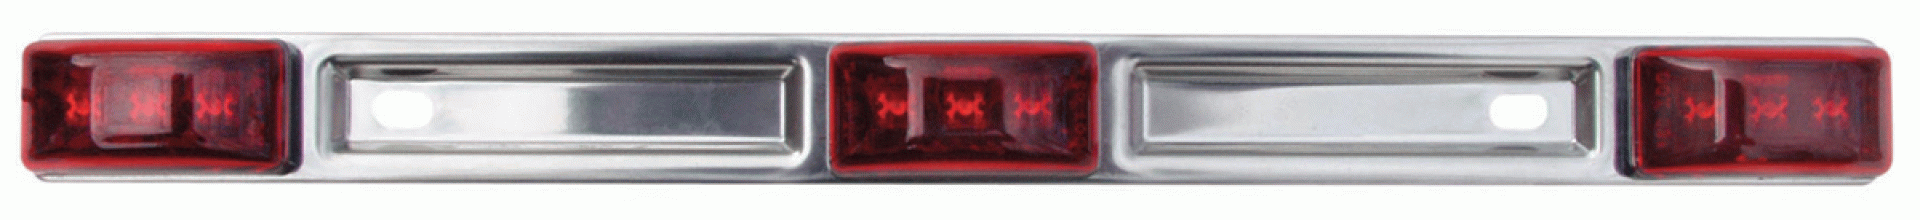 OPTRONICS INTERNATIONAL LLC | MCL97RK | LED IDENTIFICATION LIGHT BAR - SEALED RED - 3 PIECE STAINLESS